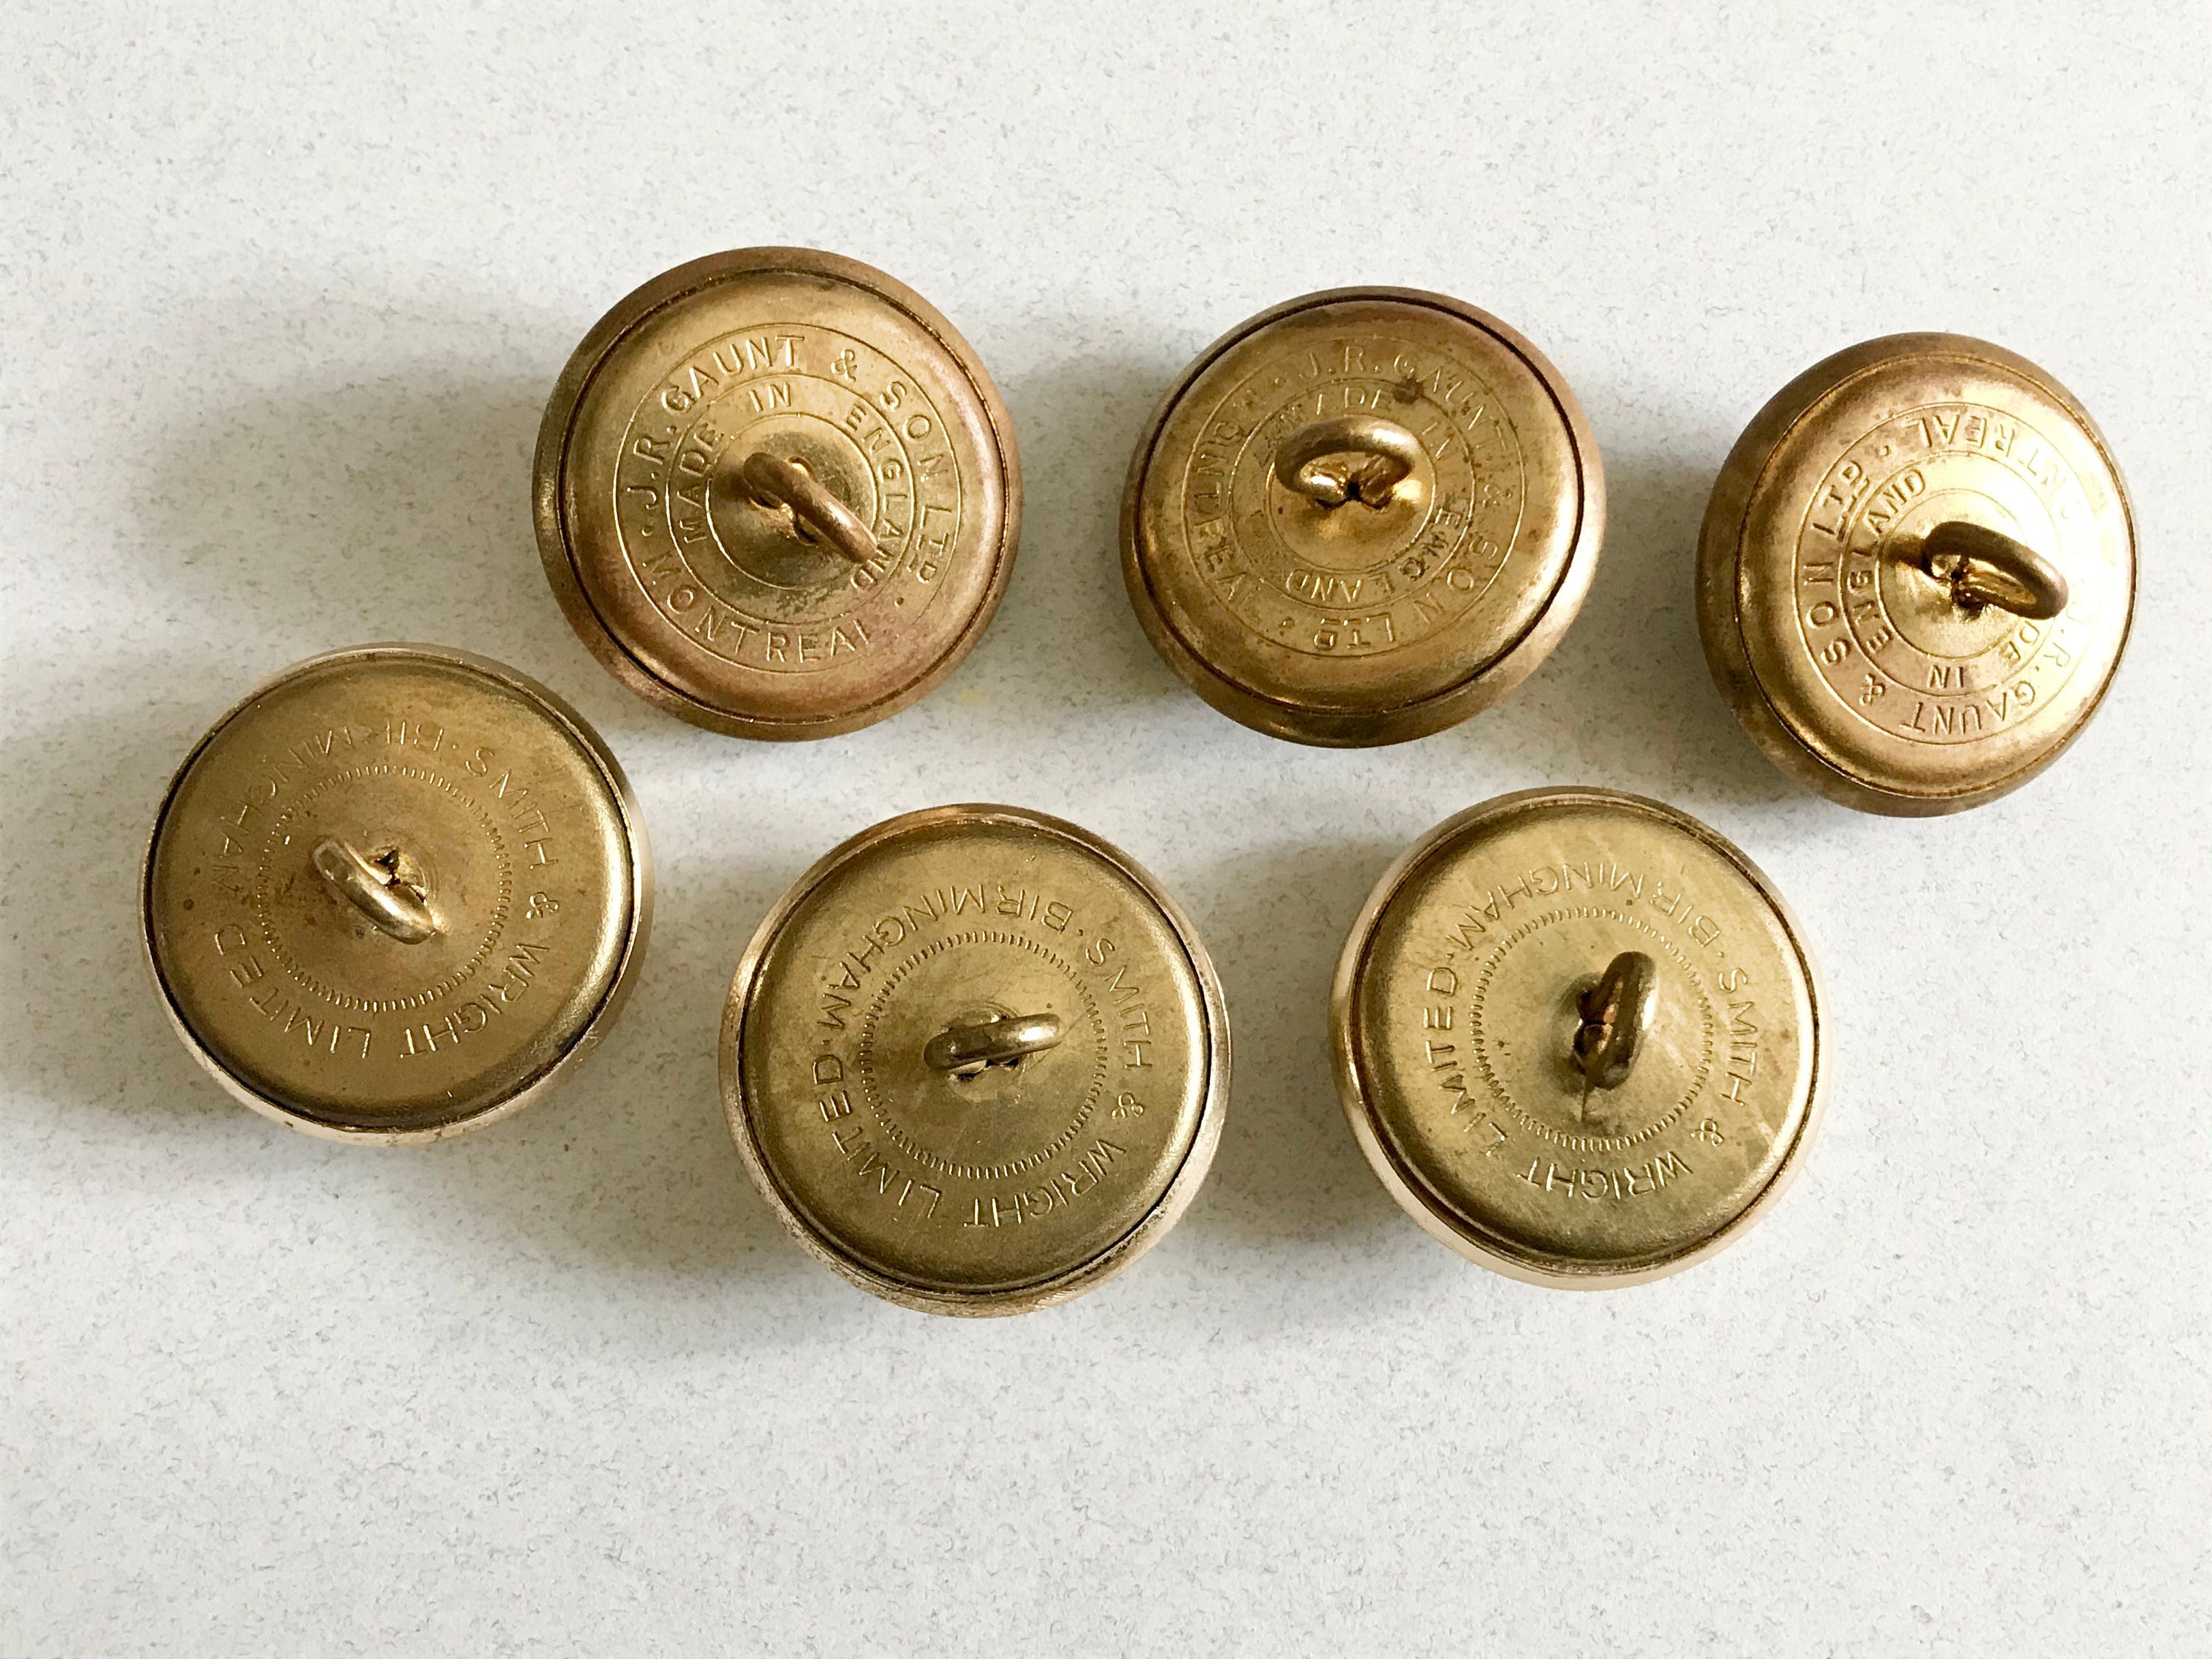 Vintage Canadian Military Uniform Buttons / Canada | Etsy